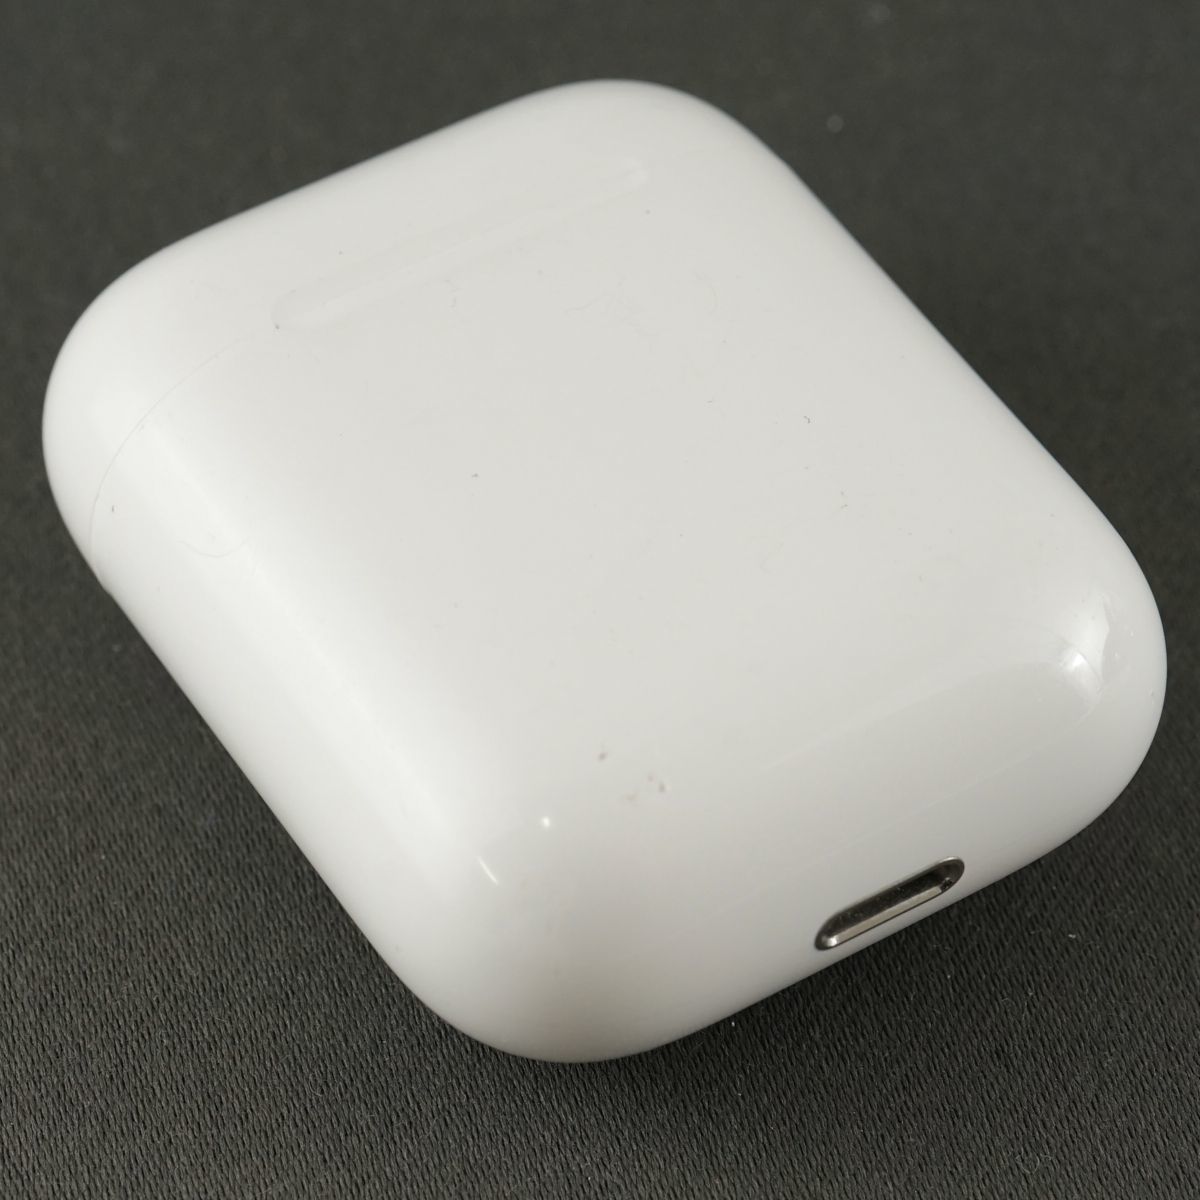 Apple AirPods with Charging Case エアーポッズ ワイヤレスイヤホン USED品 第二世代 Bluetooth MV7N2J/A 完動品 即日発送 T V8018_画像9